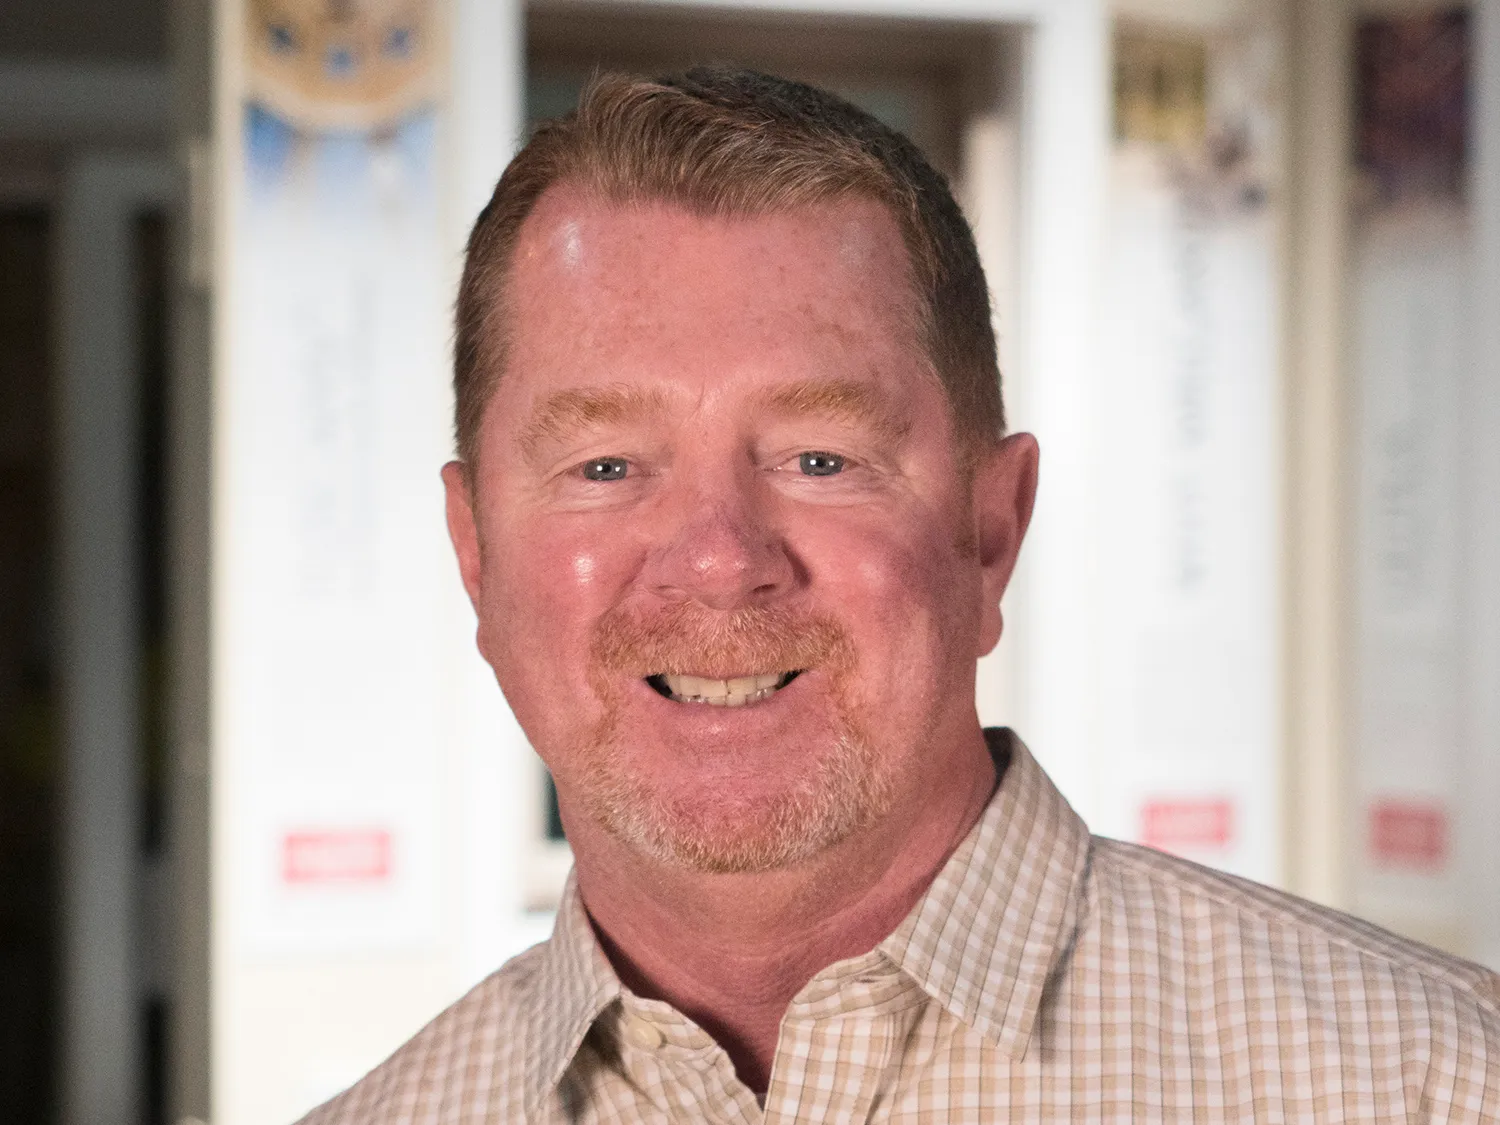 Jeff Alexander is second-generation owner of Alexander Company, a Diamond Certified company since 2012. He can be reached at (650) 525-4171 or by email.